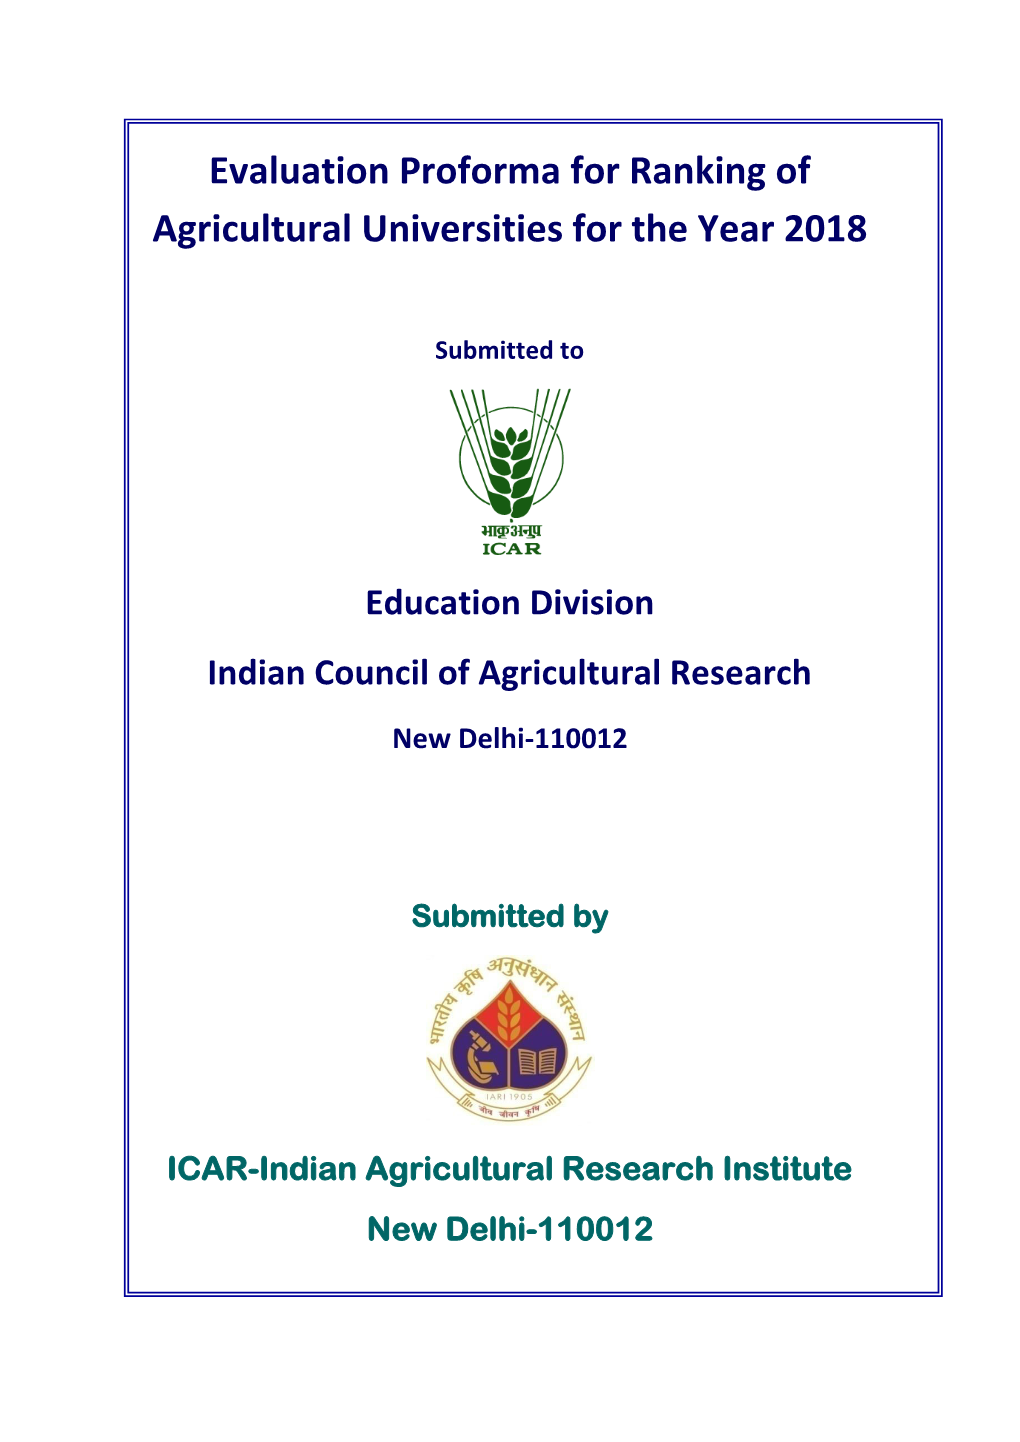 Evaluation Proforma for Ranking of Agricultural Universities for the Year 2018